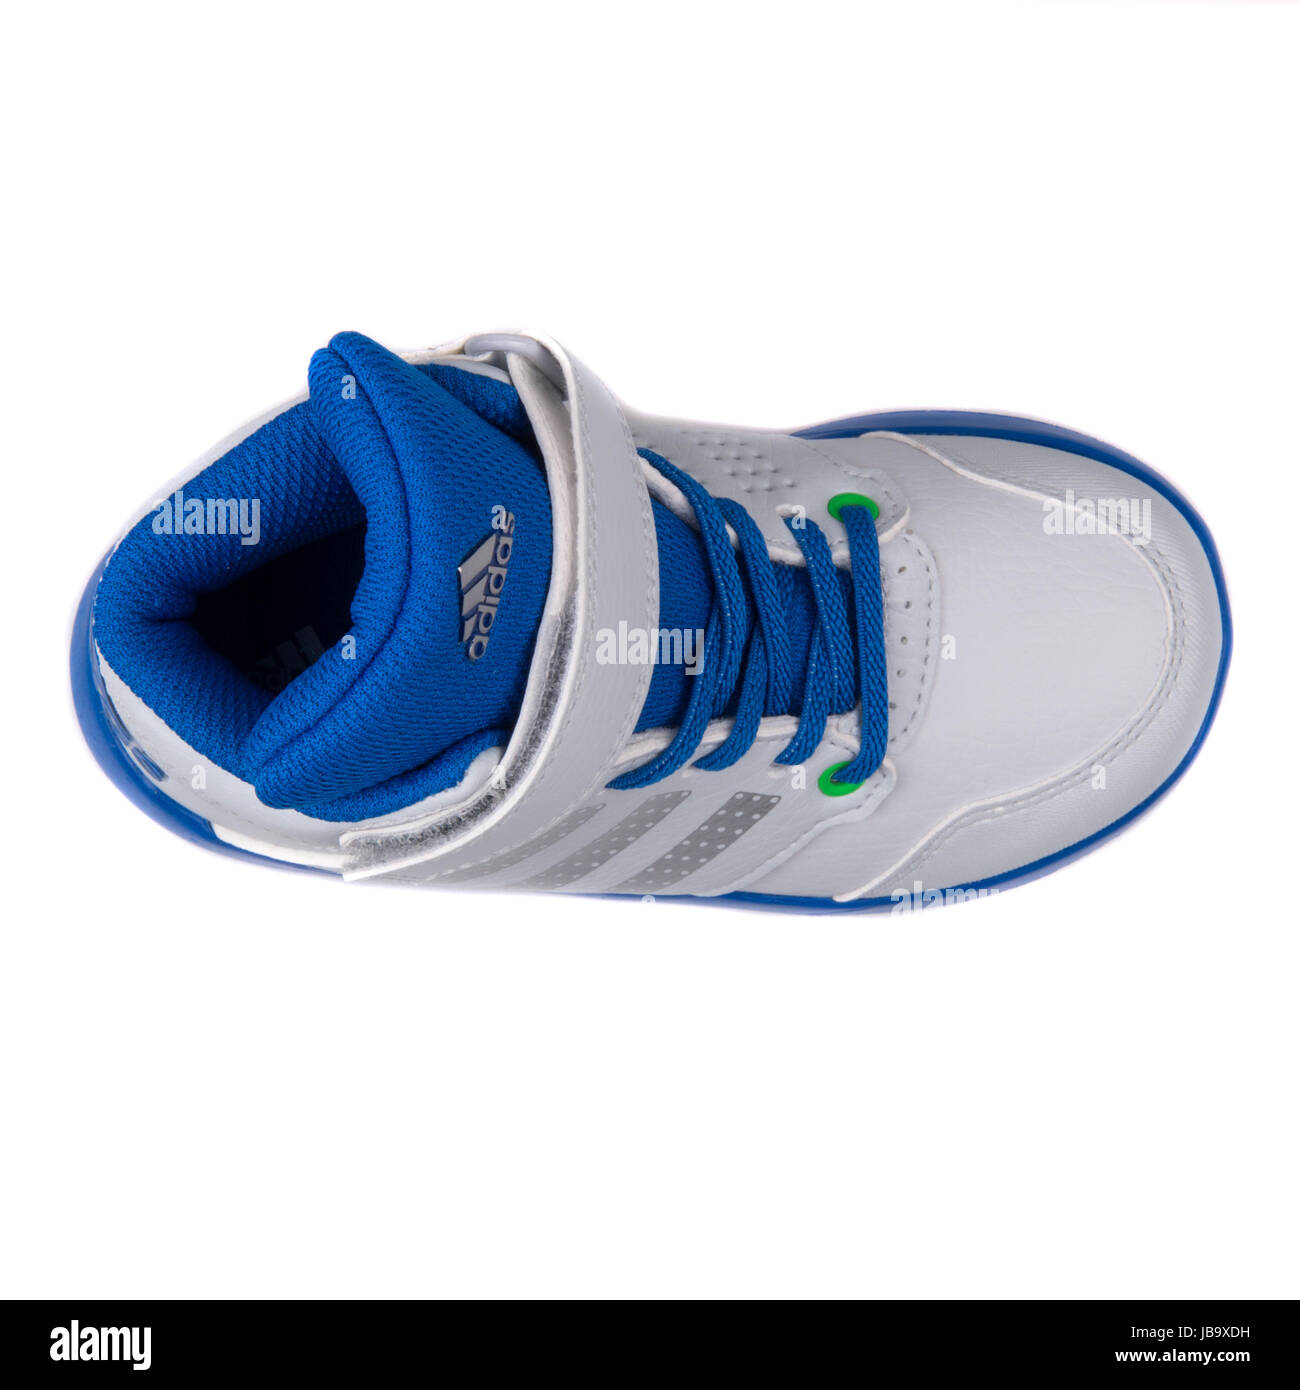 Adidas Jan BS 2 mid 1 Silver and Blue Kids Running Shoes - B23909 Stock  Photo - Alamy